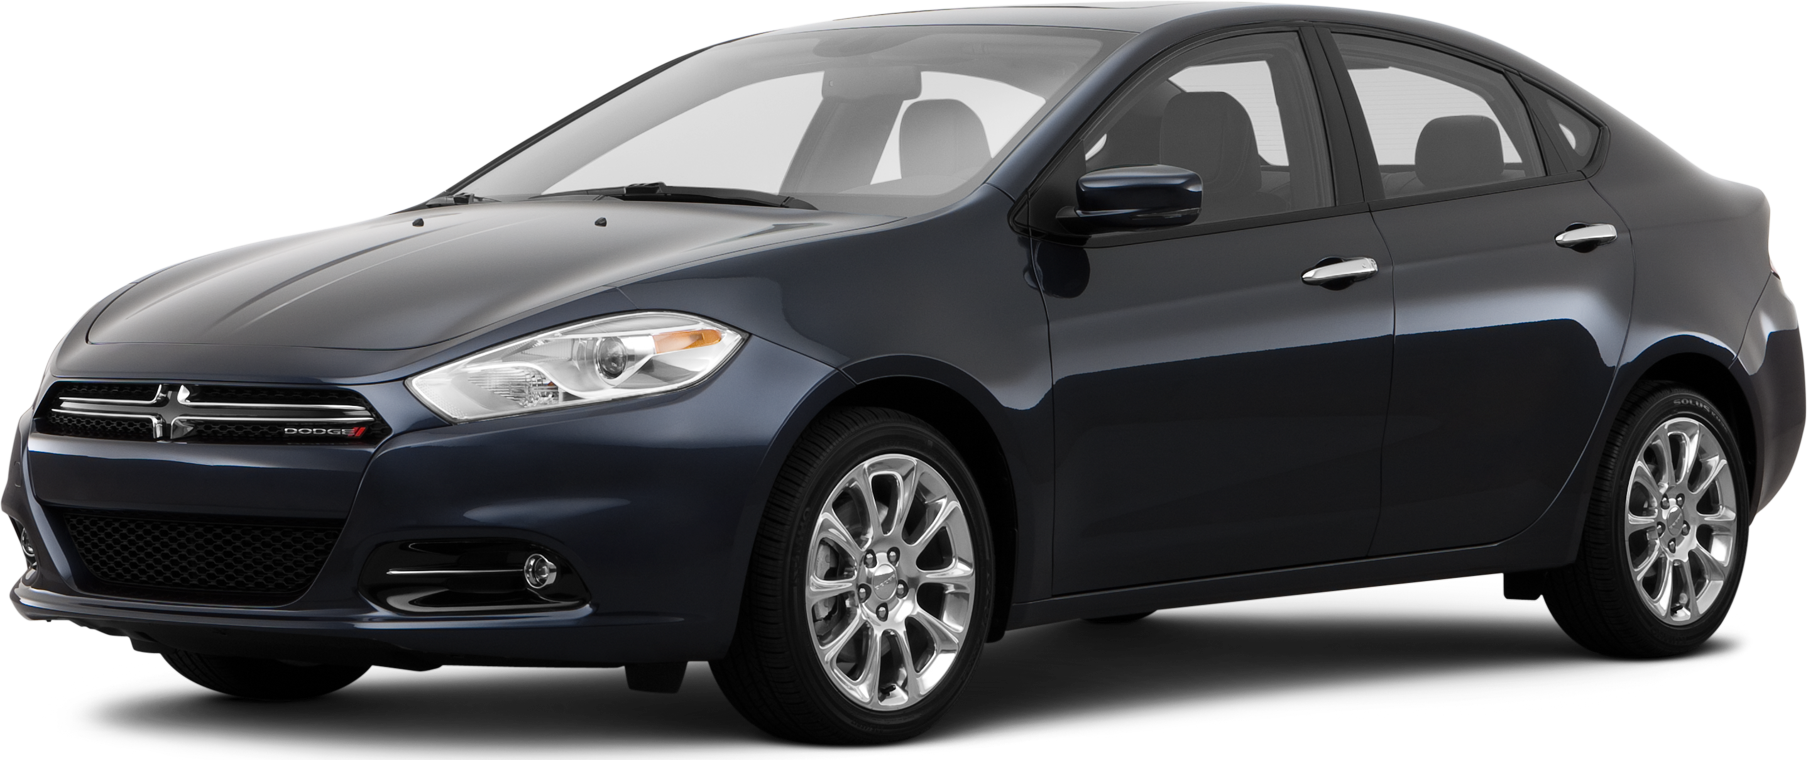 2014 Dodge Dart Price, Value, Ratings and Reviews Kelley Blue Book pic